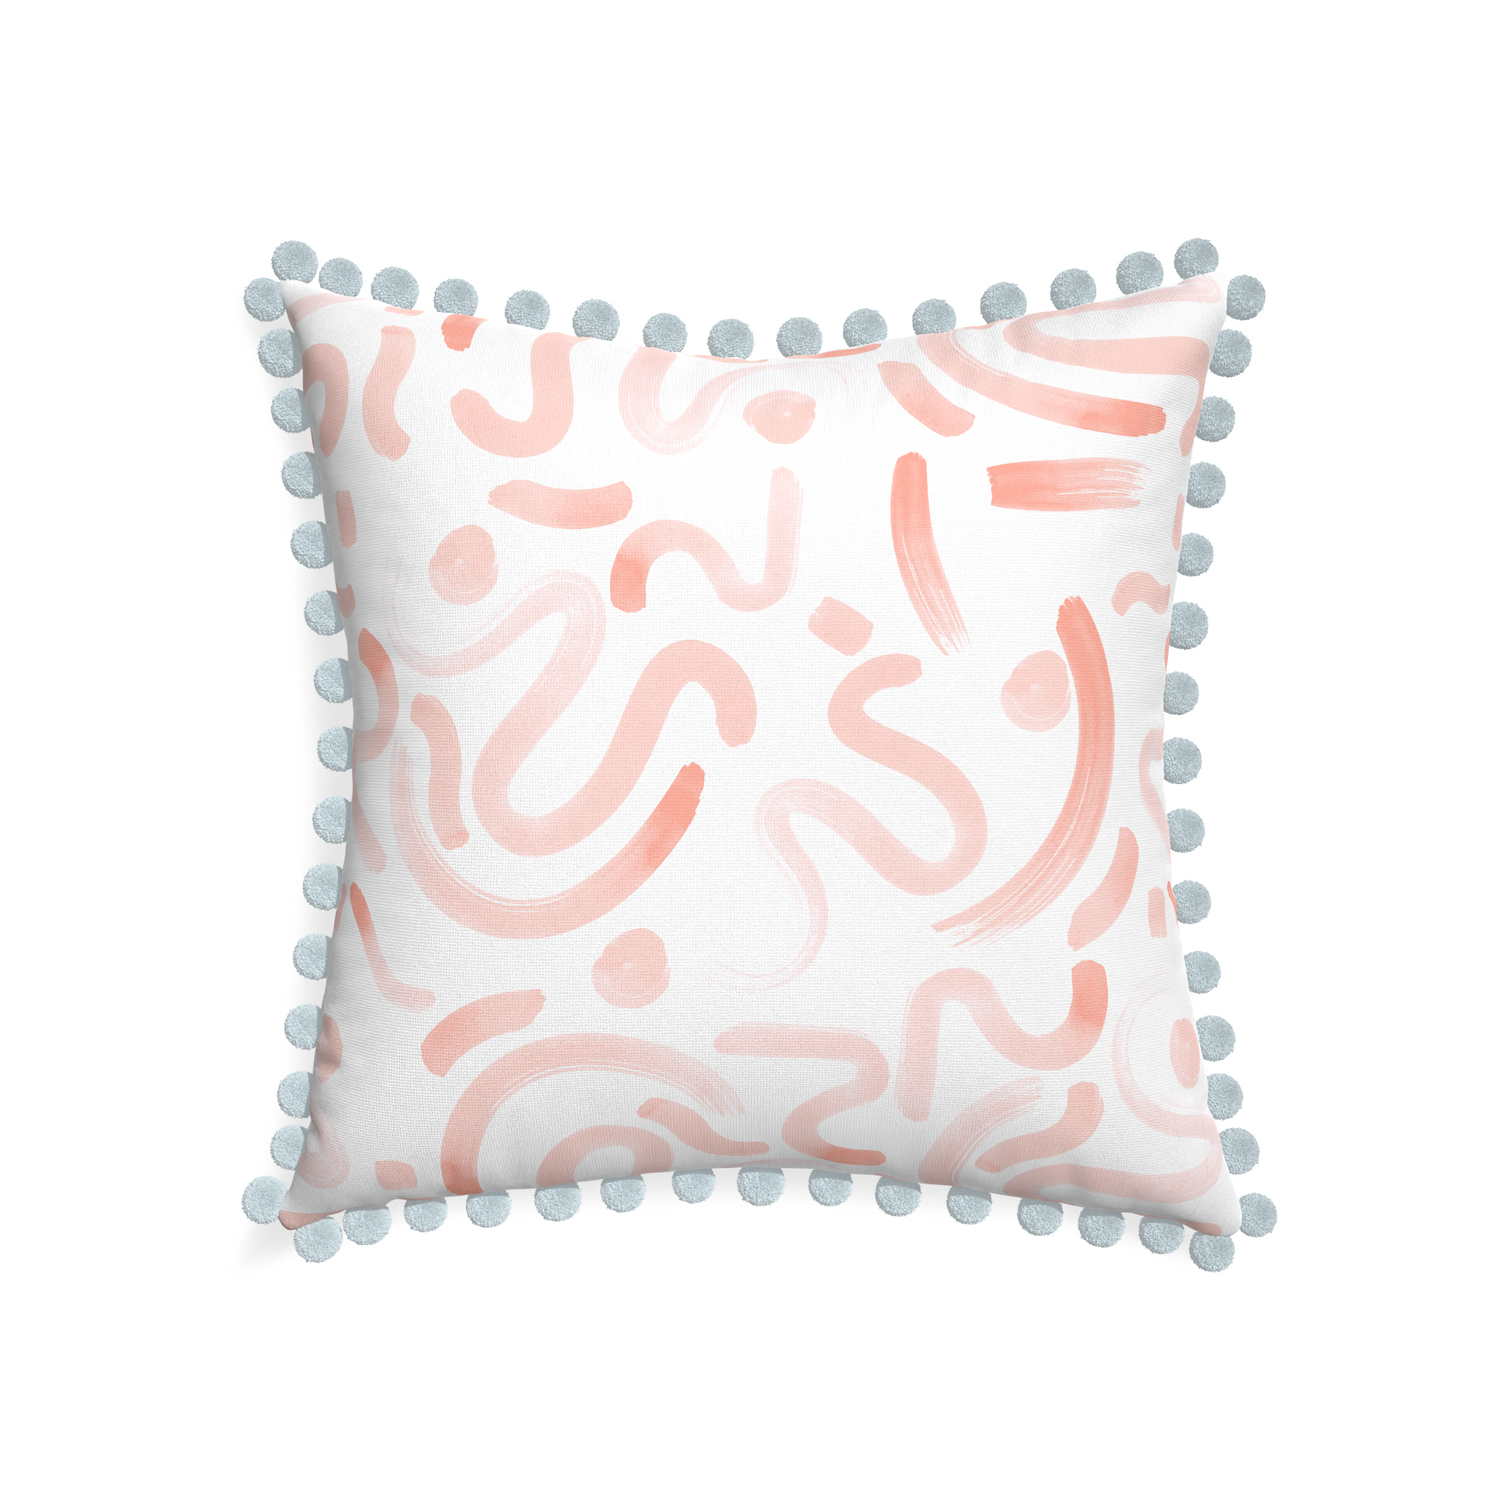 22-square hockney pink custom pink graphicpillow with powder pom pom on white background